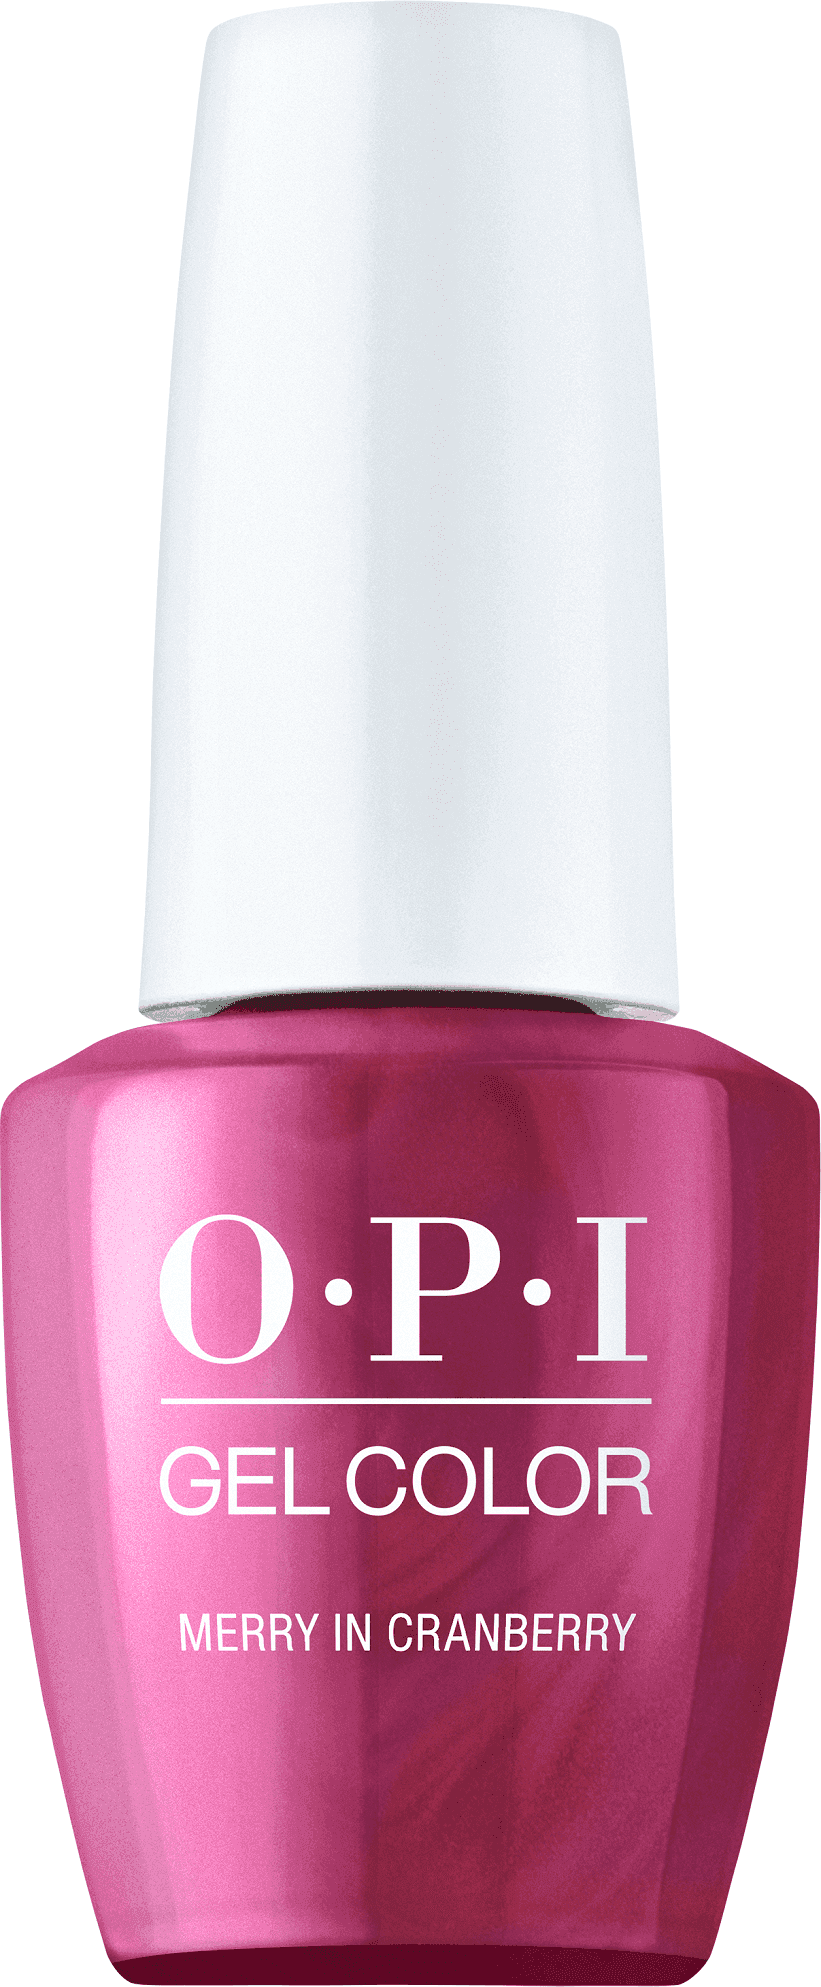 OPI GelColor - Merry in Cranberry - GCM07